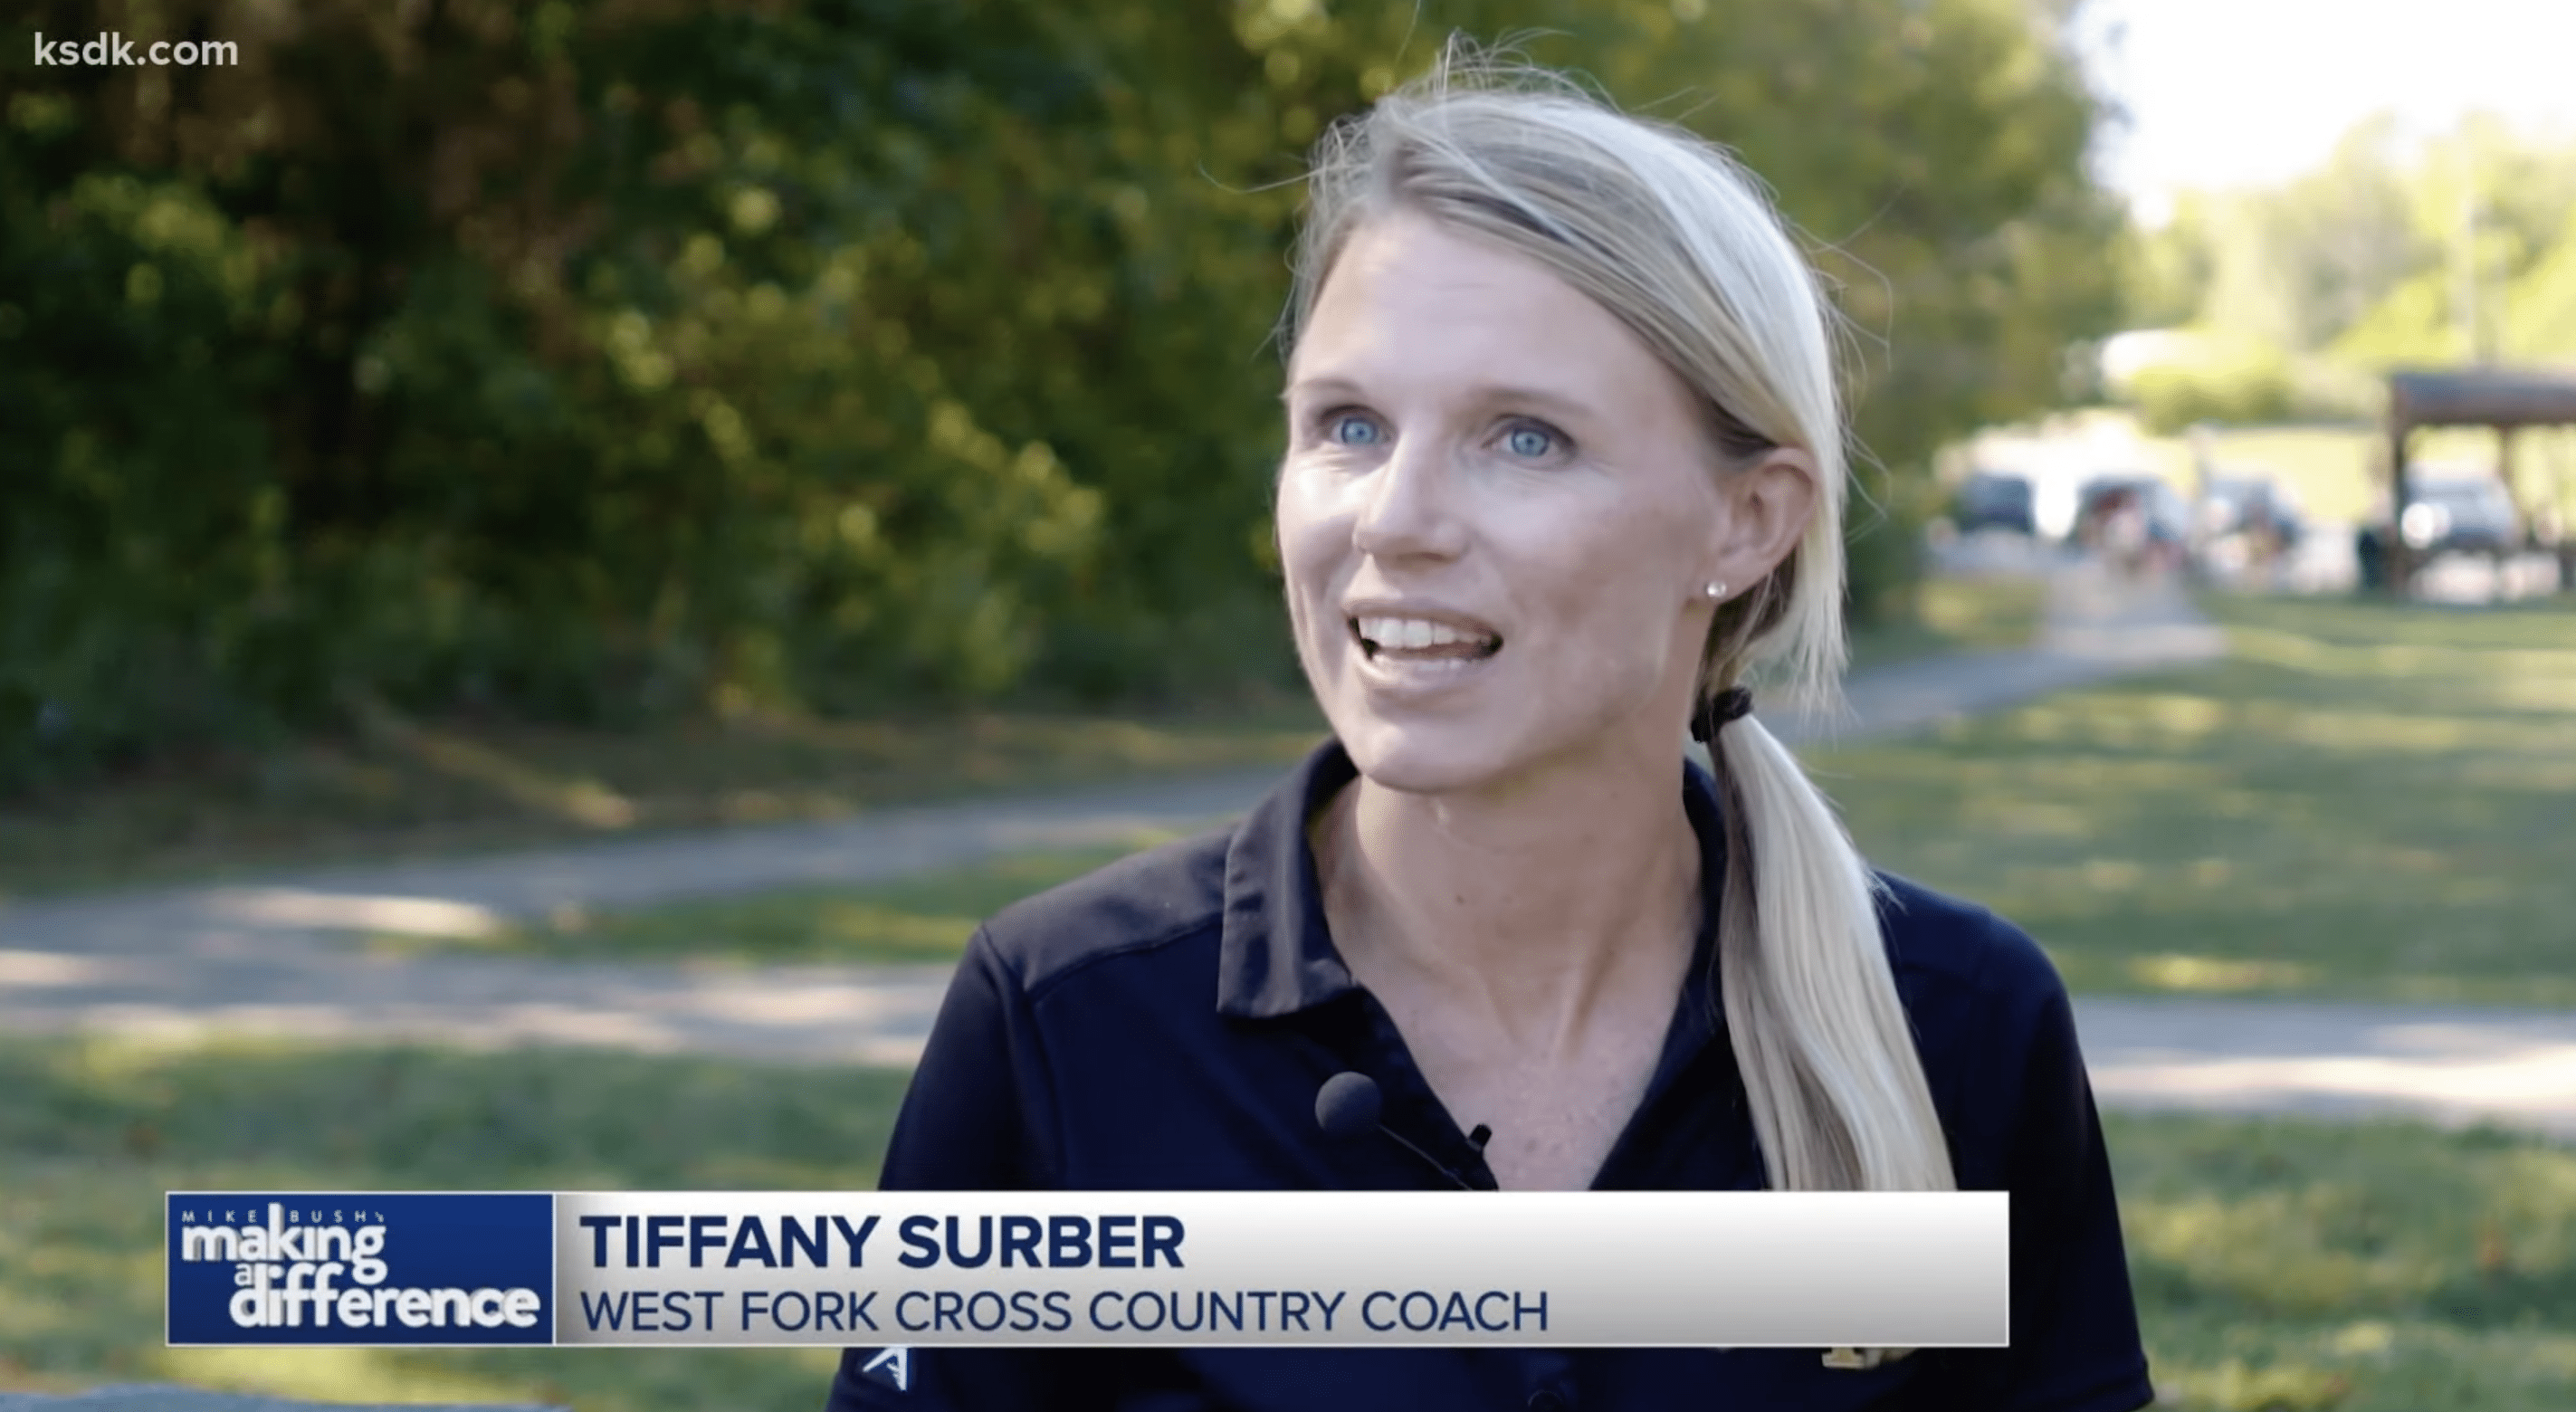 West Fork Cross-Country Coach Tiffany Surber shared her thoughts on valuing inclusiveness on the team. | Photo: YouTube.com/KSDK News